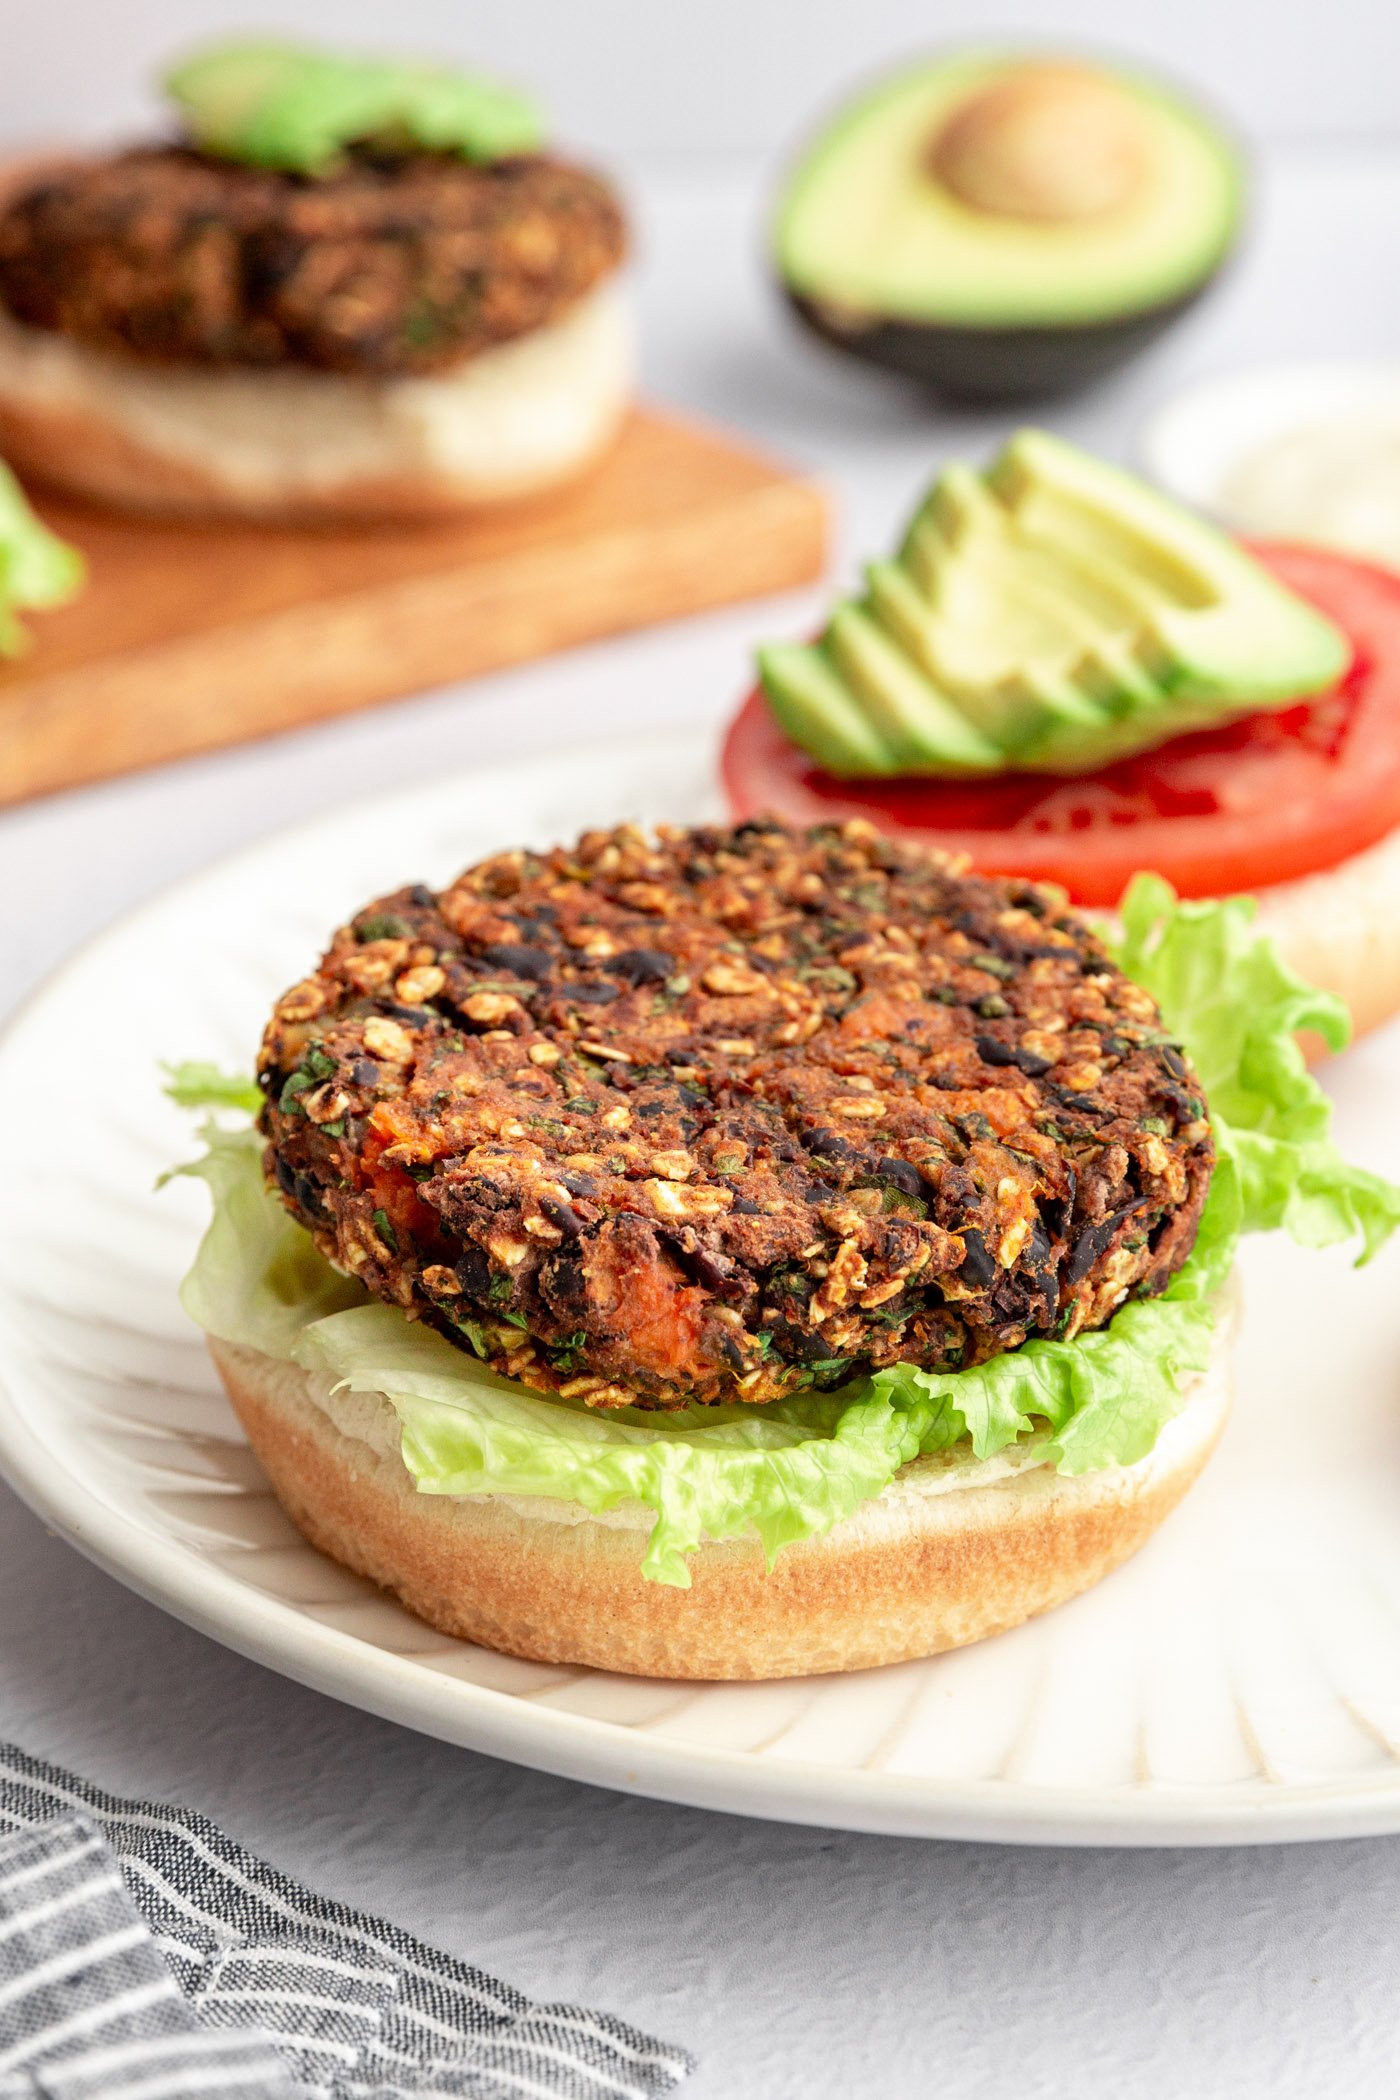 Black bean sweet potato burgers being assembled on burger buns with lettuce, tomato slices, and sliced avocado. They burgers are on a wooden cutting board and there is a striped napkin and small bowl of mayo next to the board.  